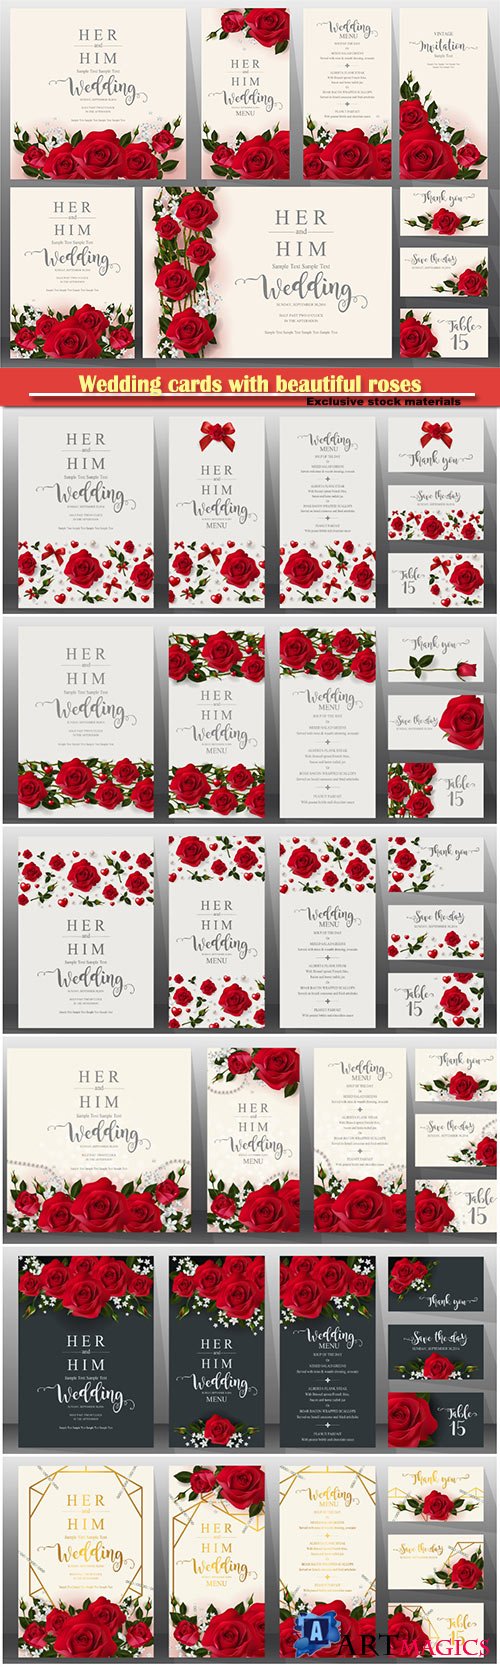 Wedding cards with beautiful roses vector illustration